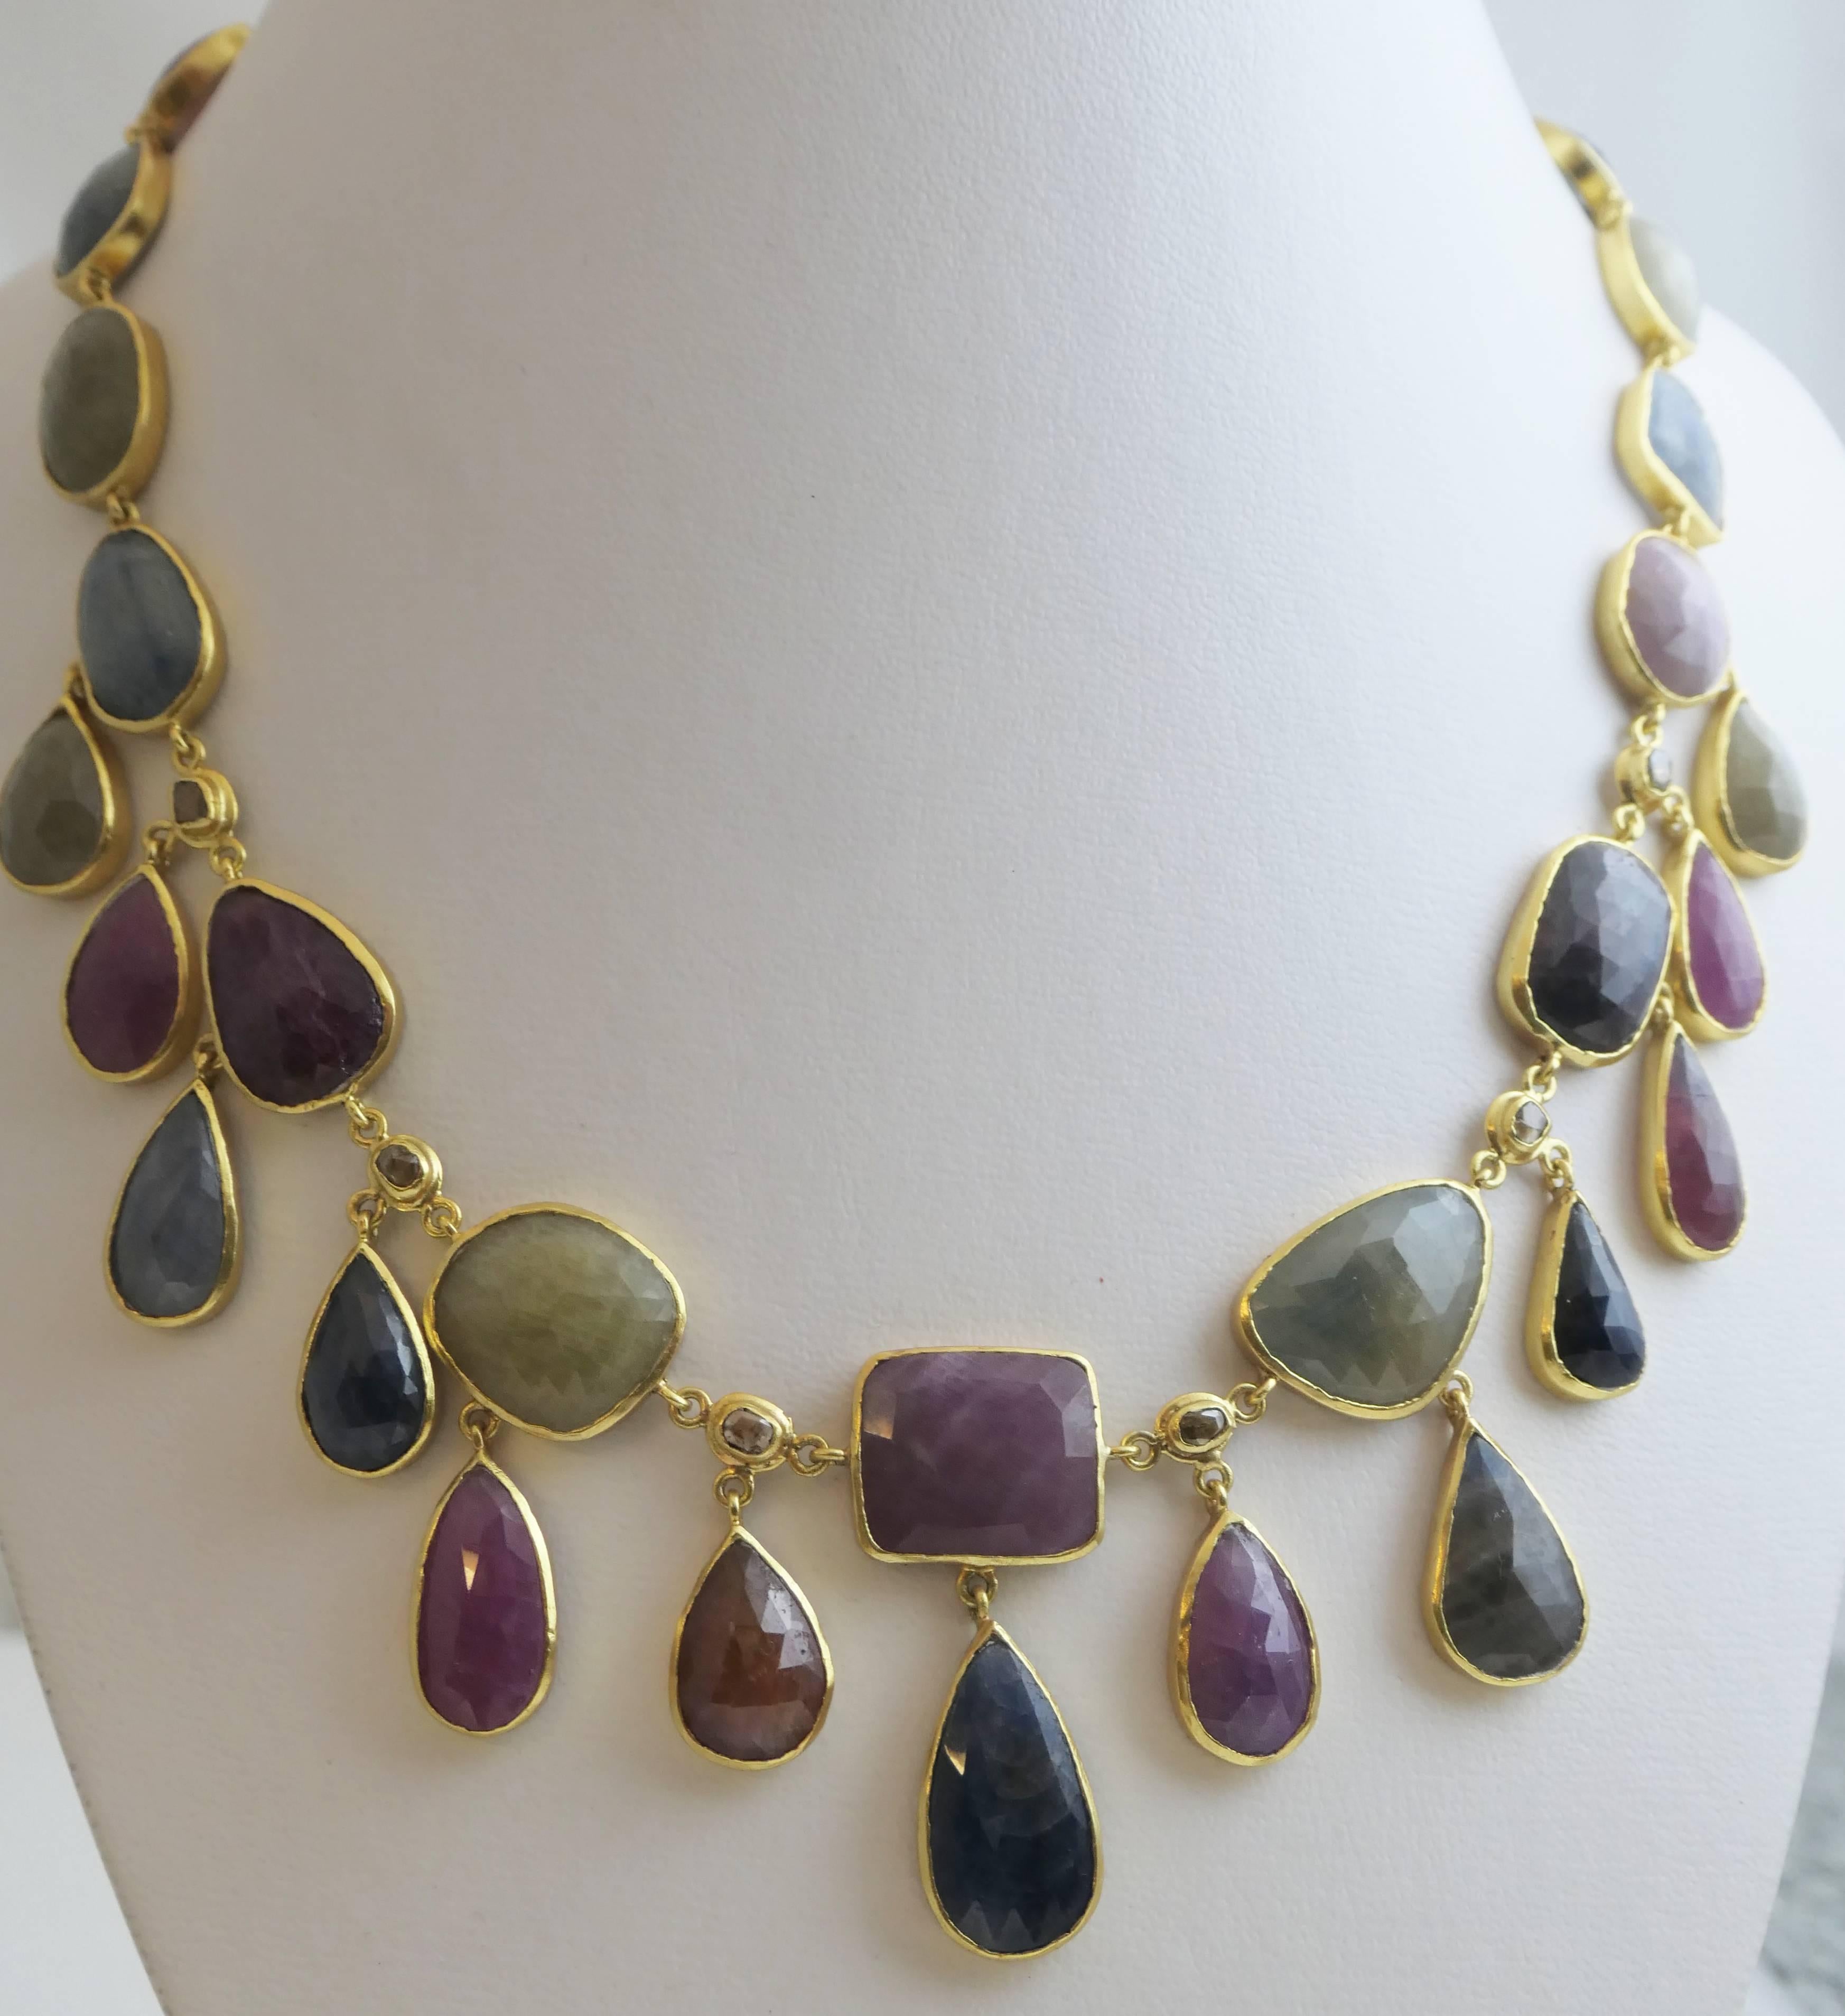 This gorgeous multi color sapphire necklace is 17,5 inches long with an additional 2.2 inch of extension chain and it has a hook clasp. The central drop measures approximately 4.4 cm in depth. The sapphire gemstones are all faceted and varying